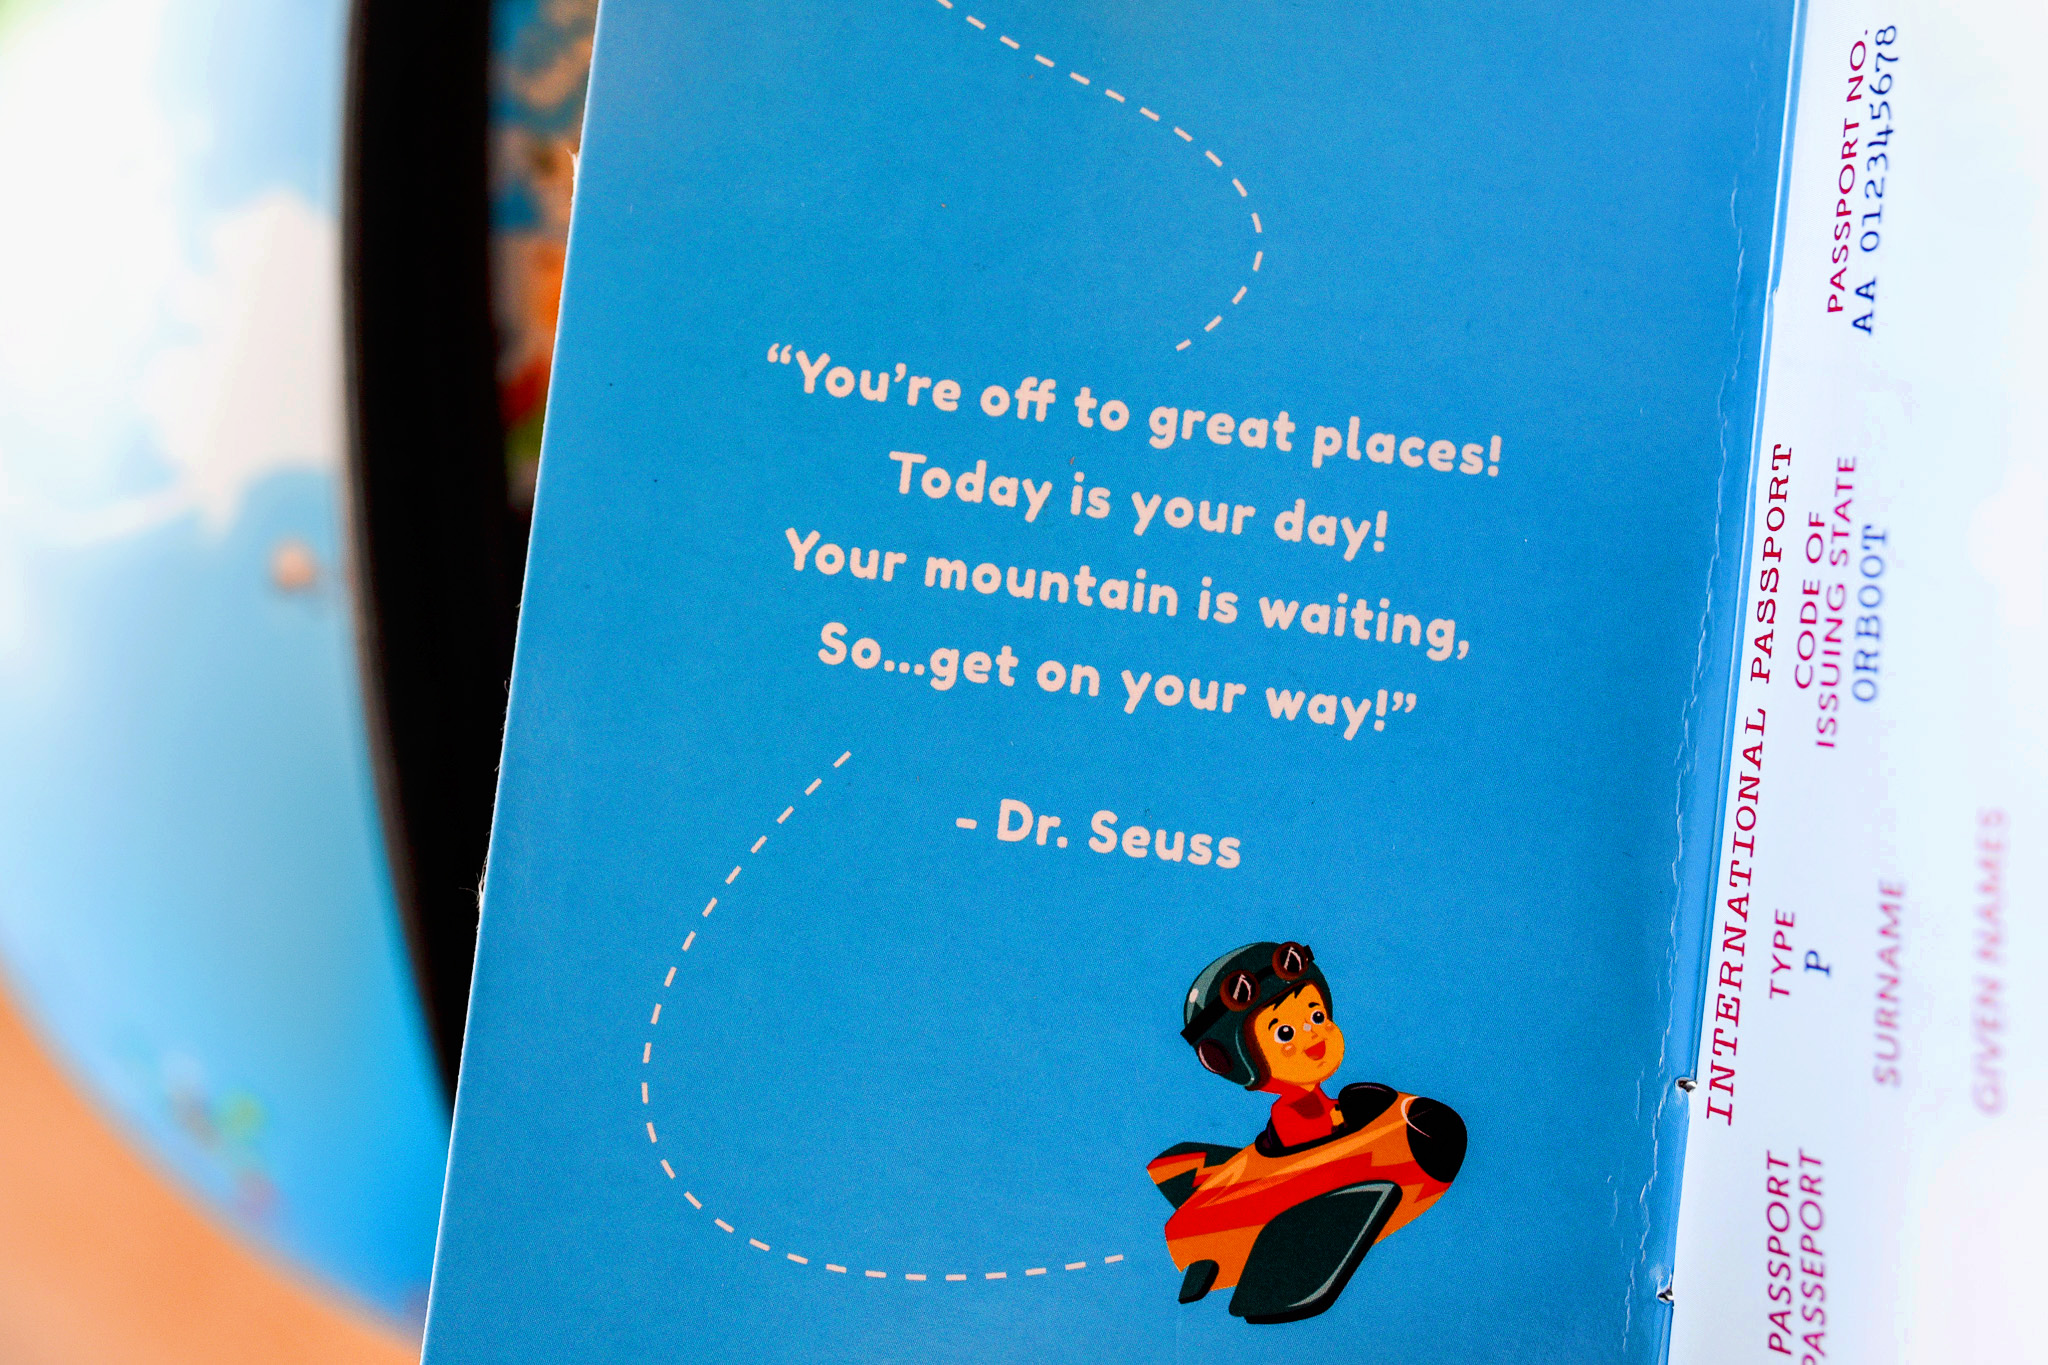 Dr Suess Quote: Reads: " You're off to great places! Today is your day! Your mountain is waiting, so, get on your way!"